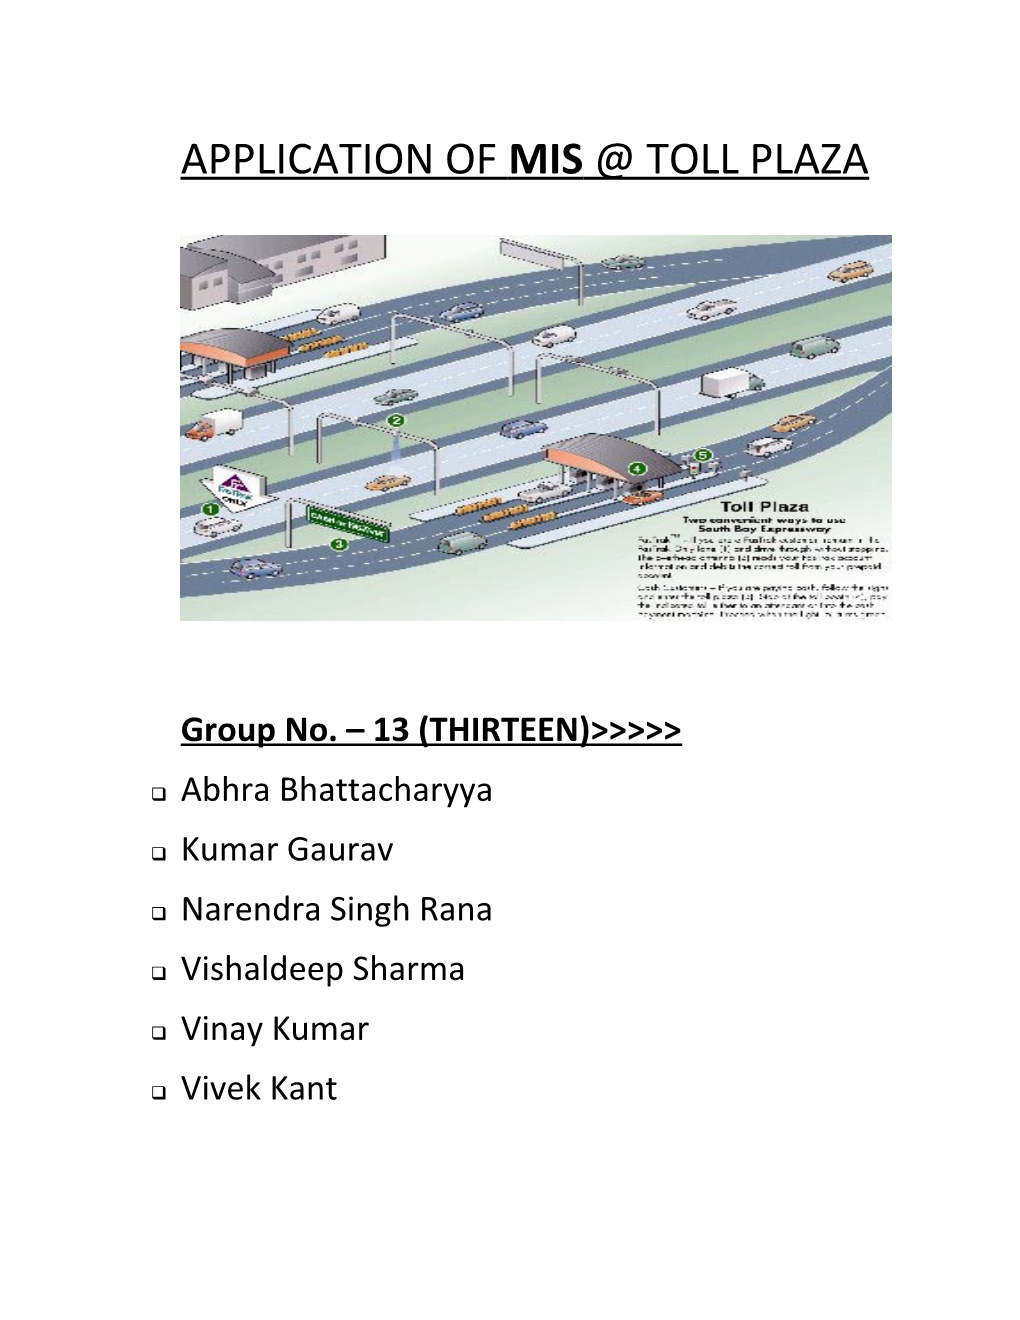 Application of Mis Toll Plaza